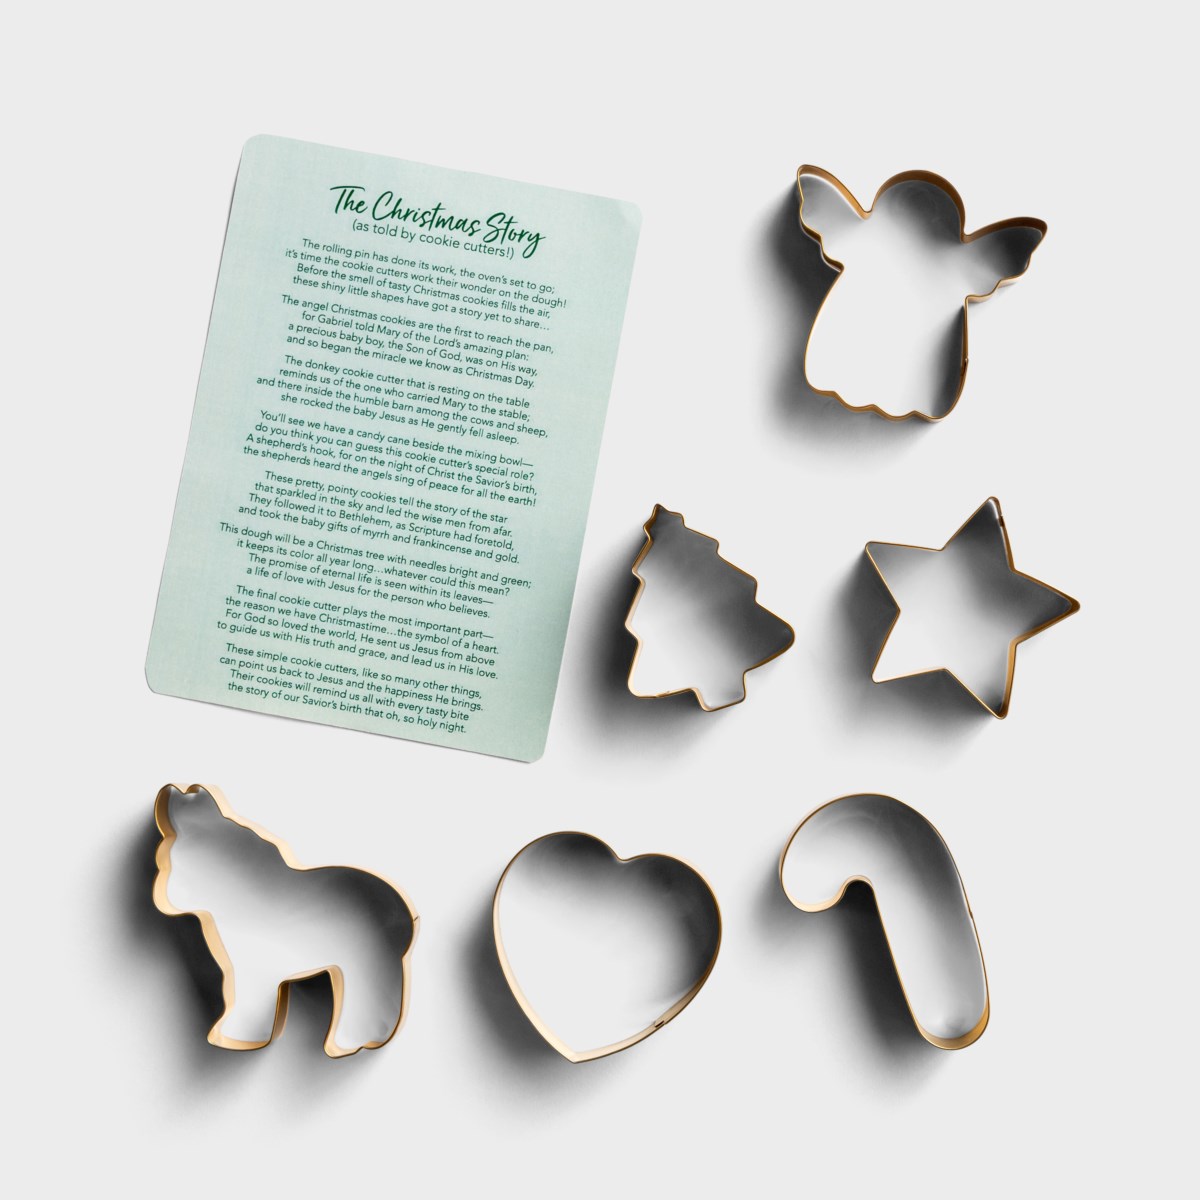 The Christmas Story - Cookie Cutter Activity Set with Devotional Card